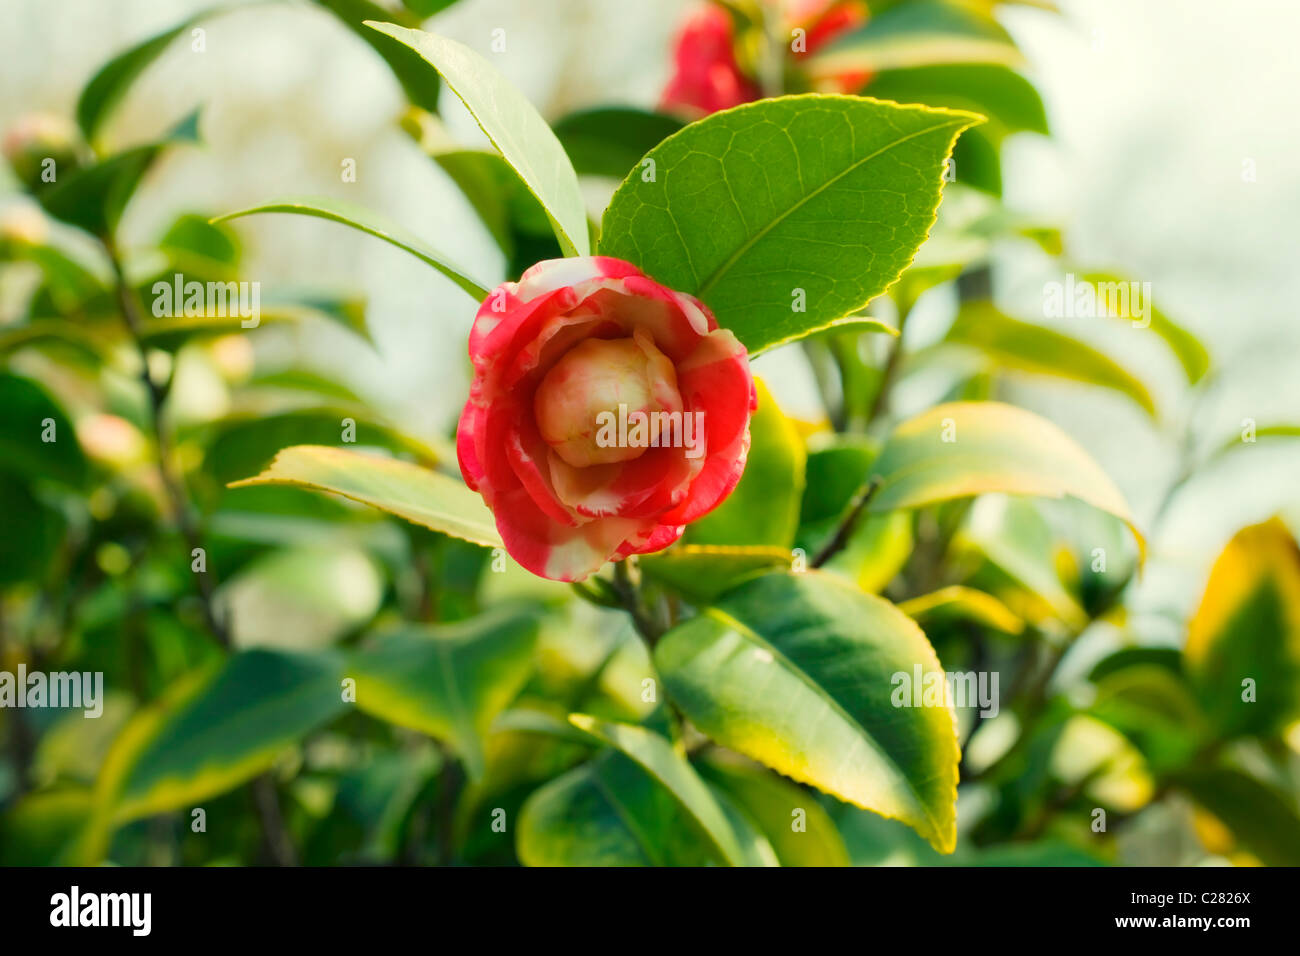 Japanese camellia pink flower on a bush close-up Stock Photo